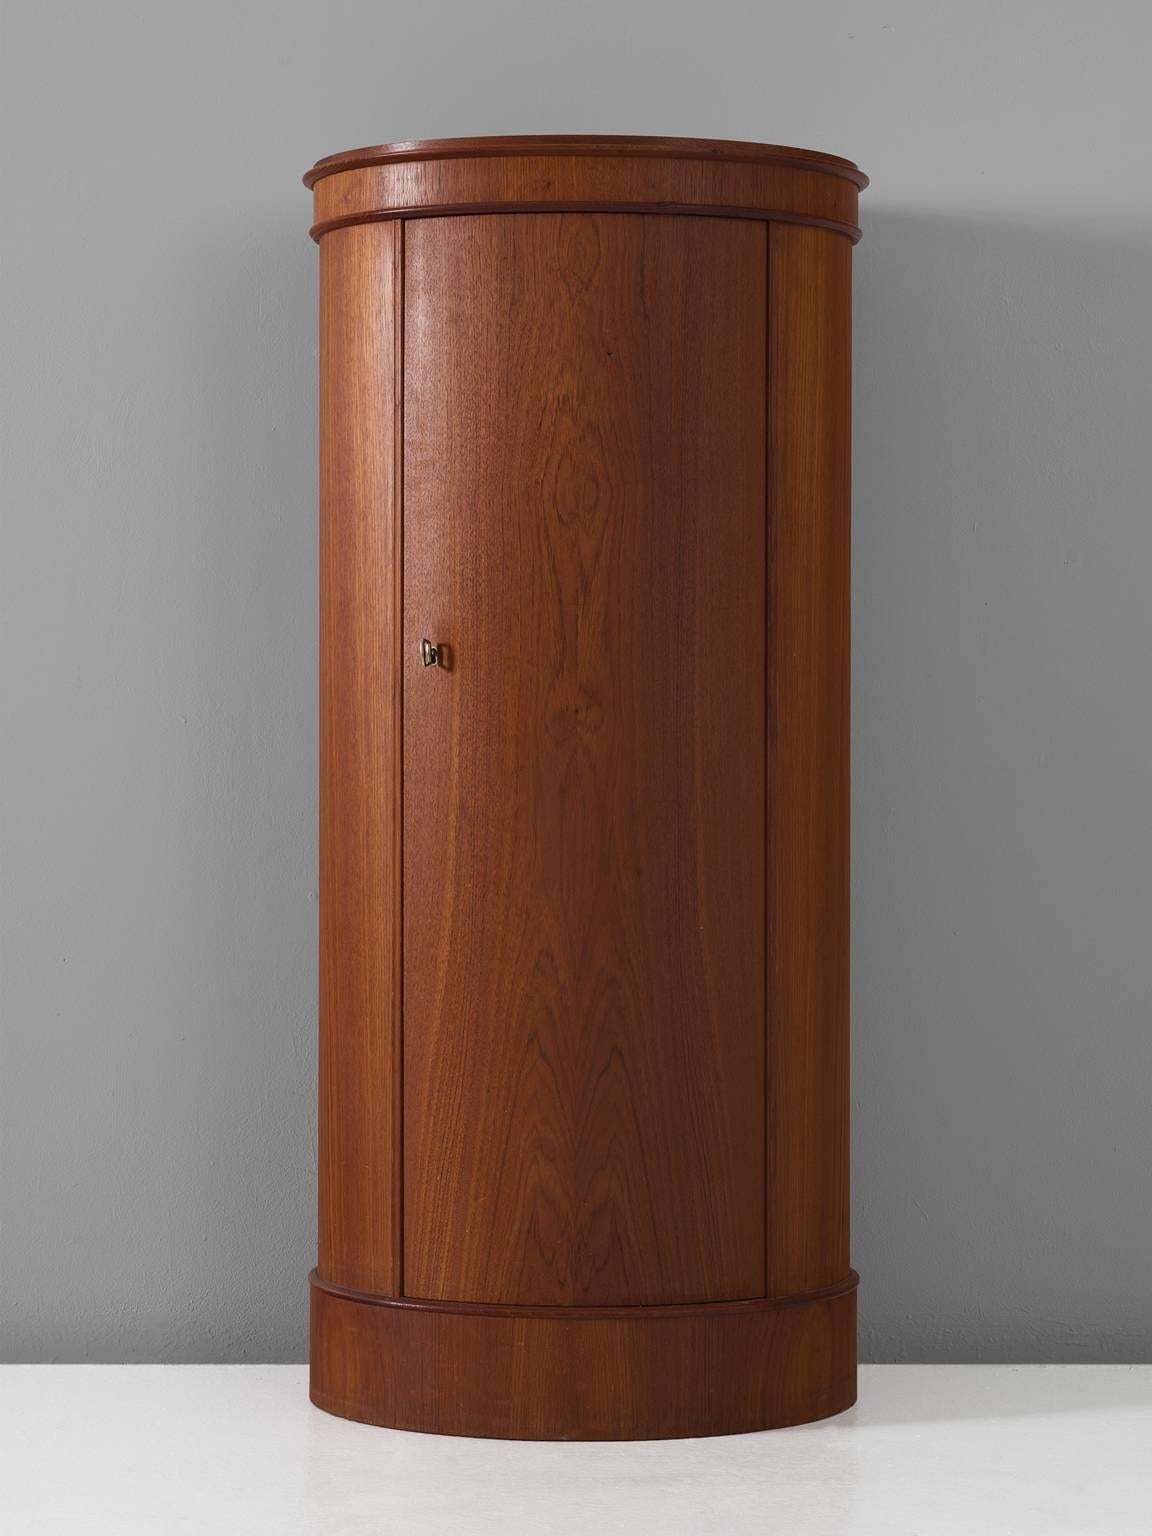 Chest with curved front, teak, 1960s, Denmark.

This small and slender teak cupboard has one door and five shelves. This piece is manufactured by Nexø Mobelfabrik in the 1960s and shows their craftsmanship. The bended door is executed to